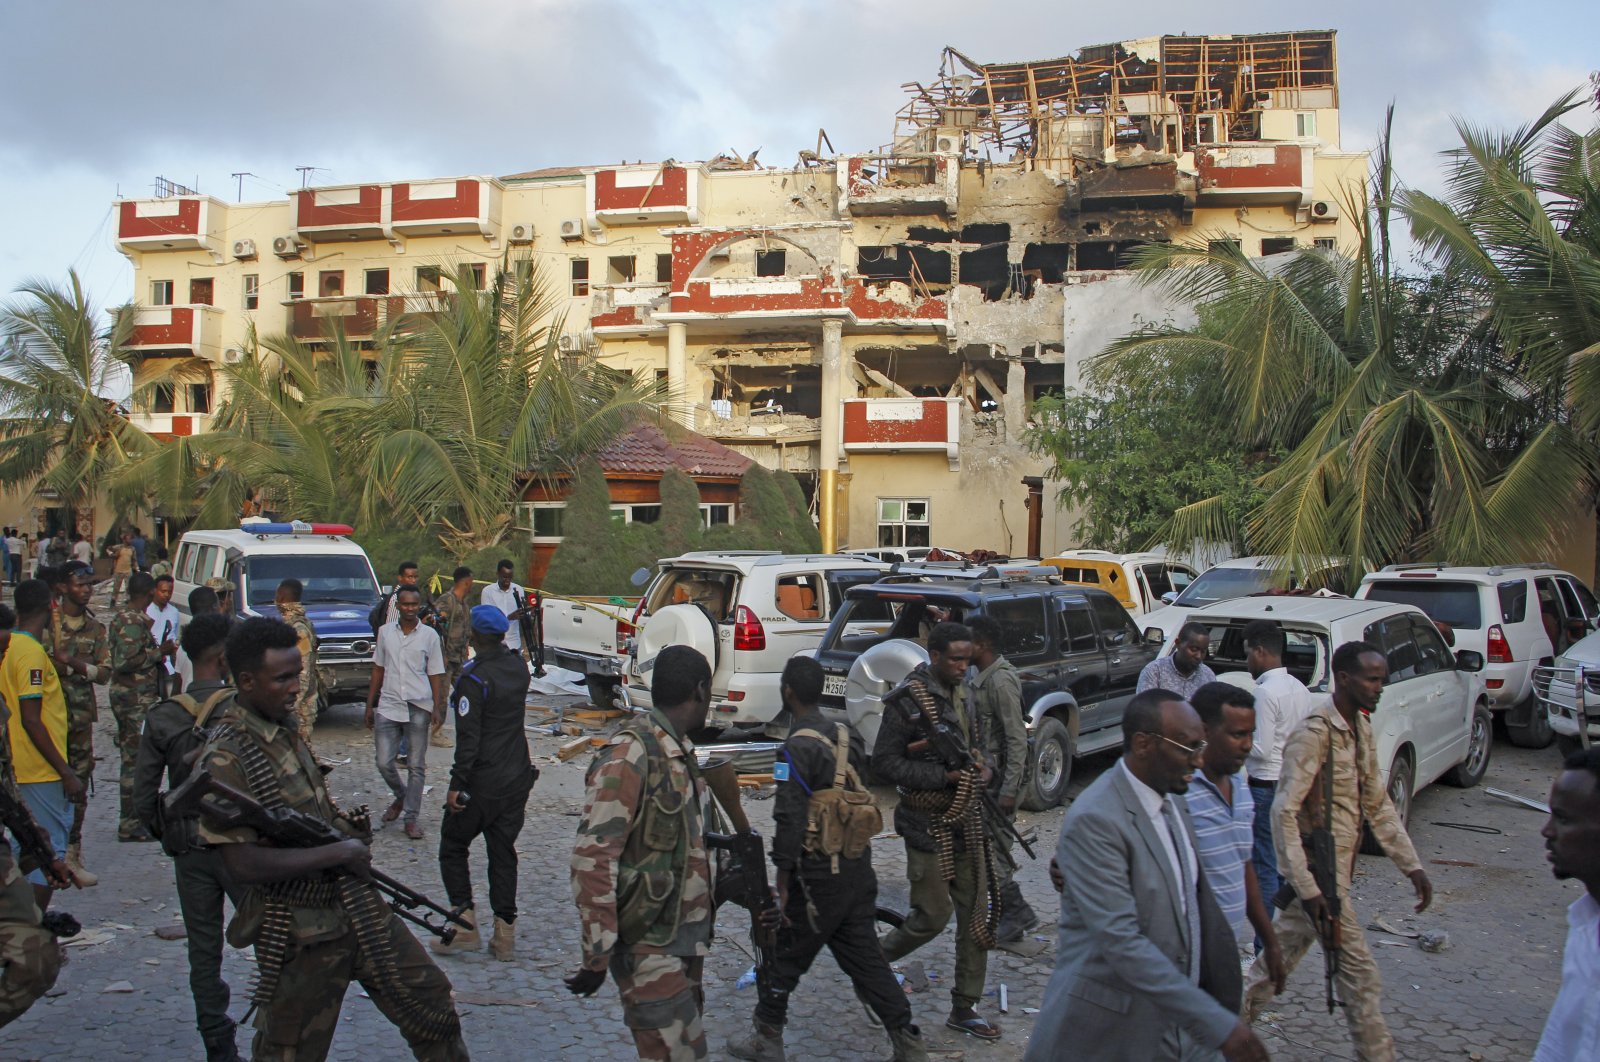 Security forces and others walk in front of the damaged Hayat Hotel in the capital Mogadishu, Somalia, Aug. 21, 2022. (AP Photo)